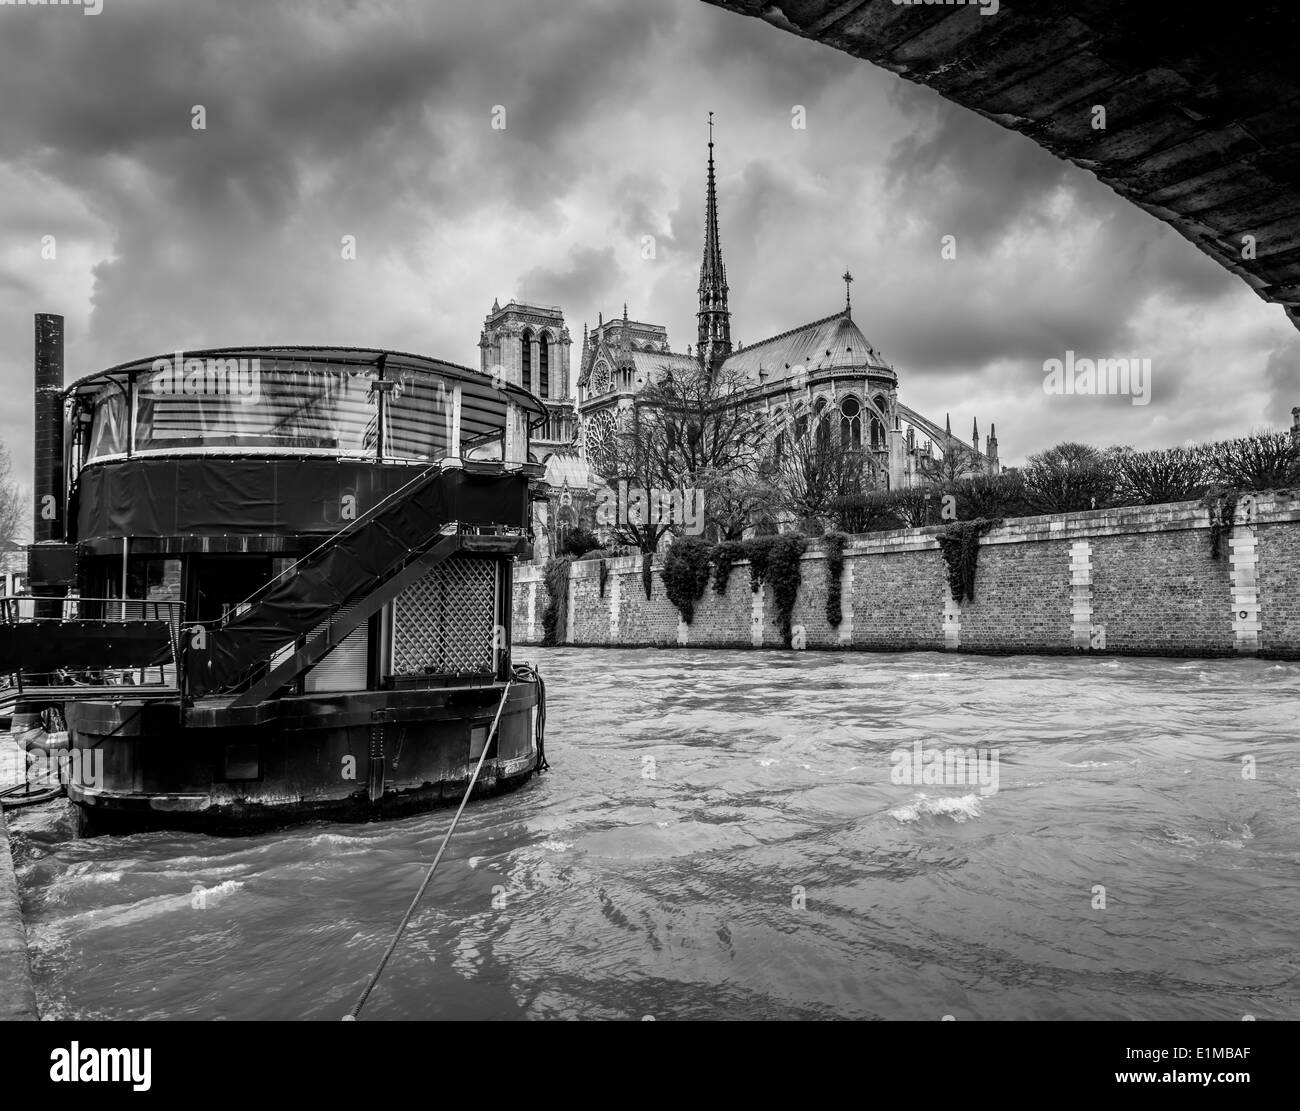 A view of Notre Dame Cathedral with a boat in the foreground as seen from the edge of the Seine river. Stock Photo